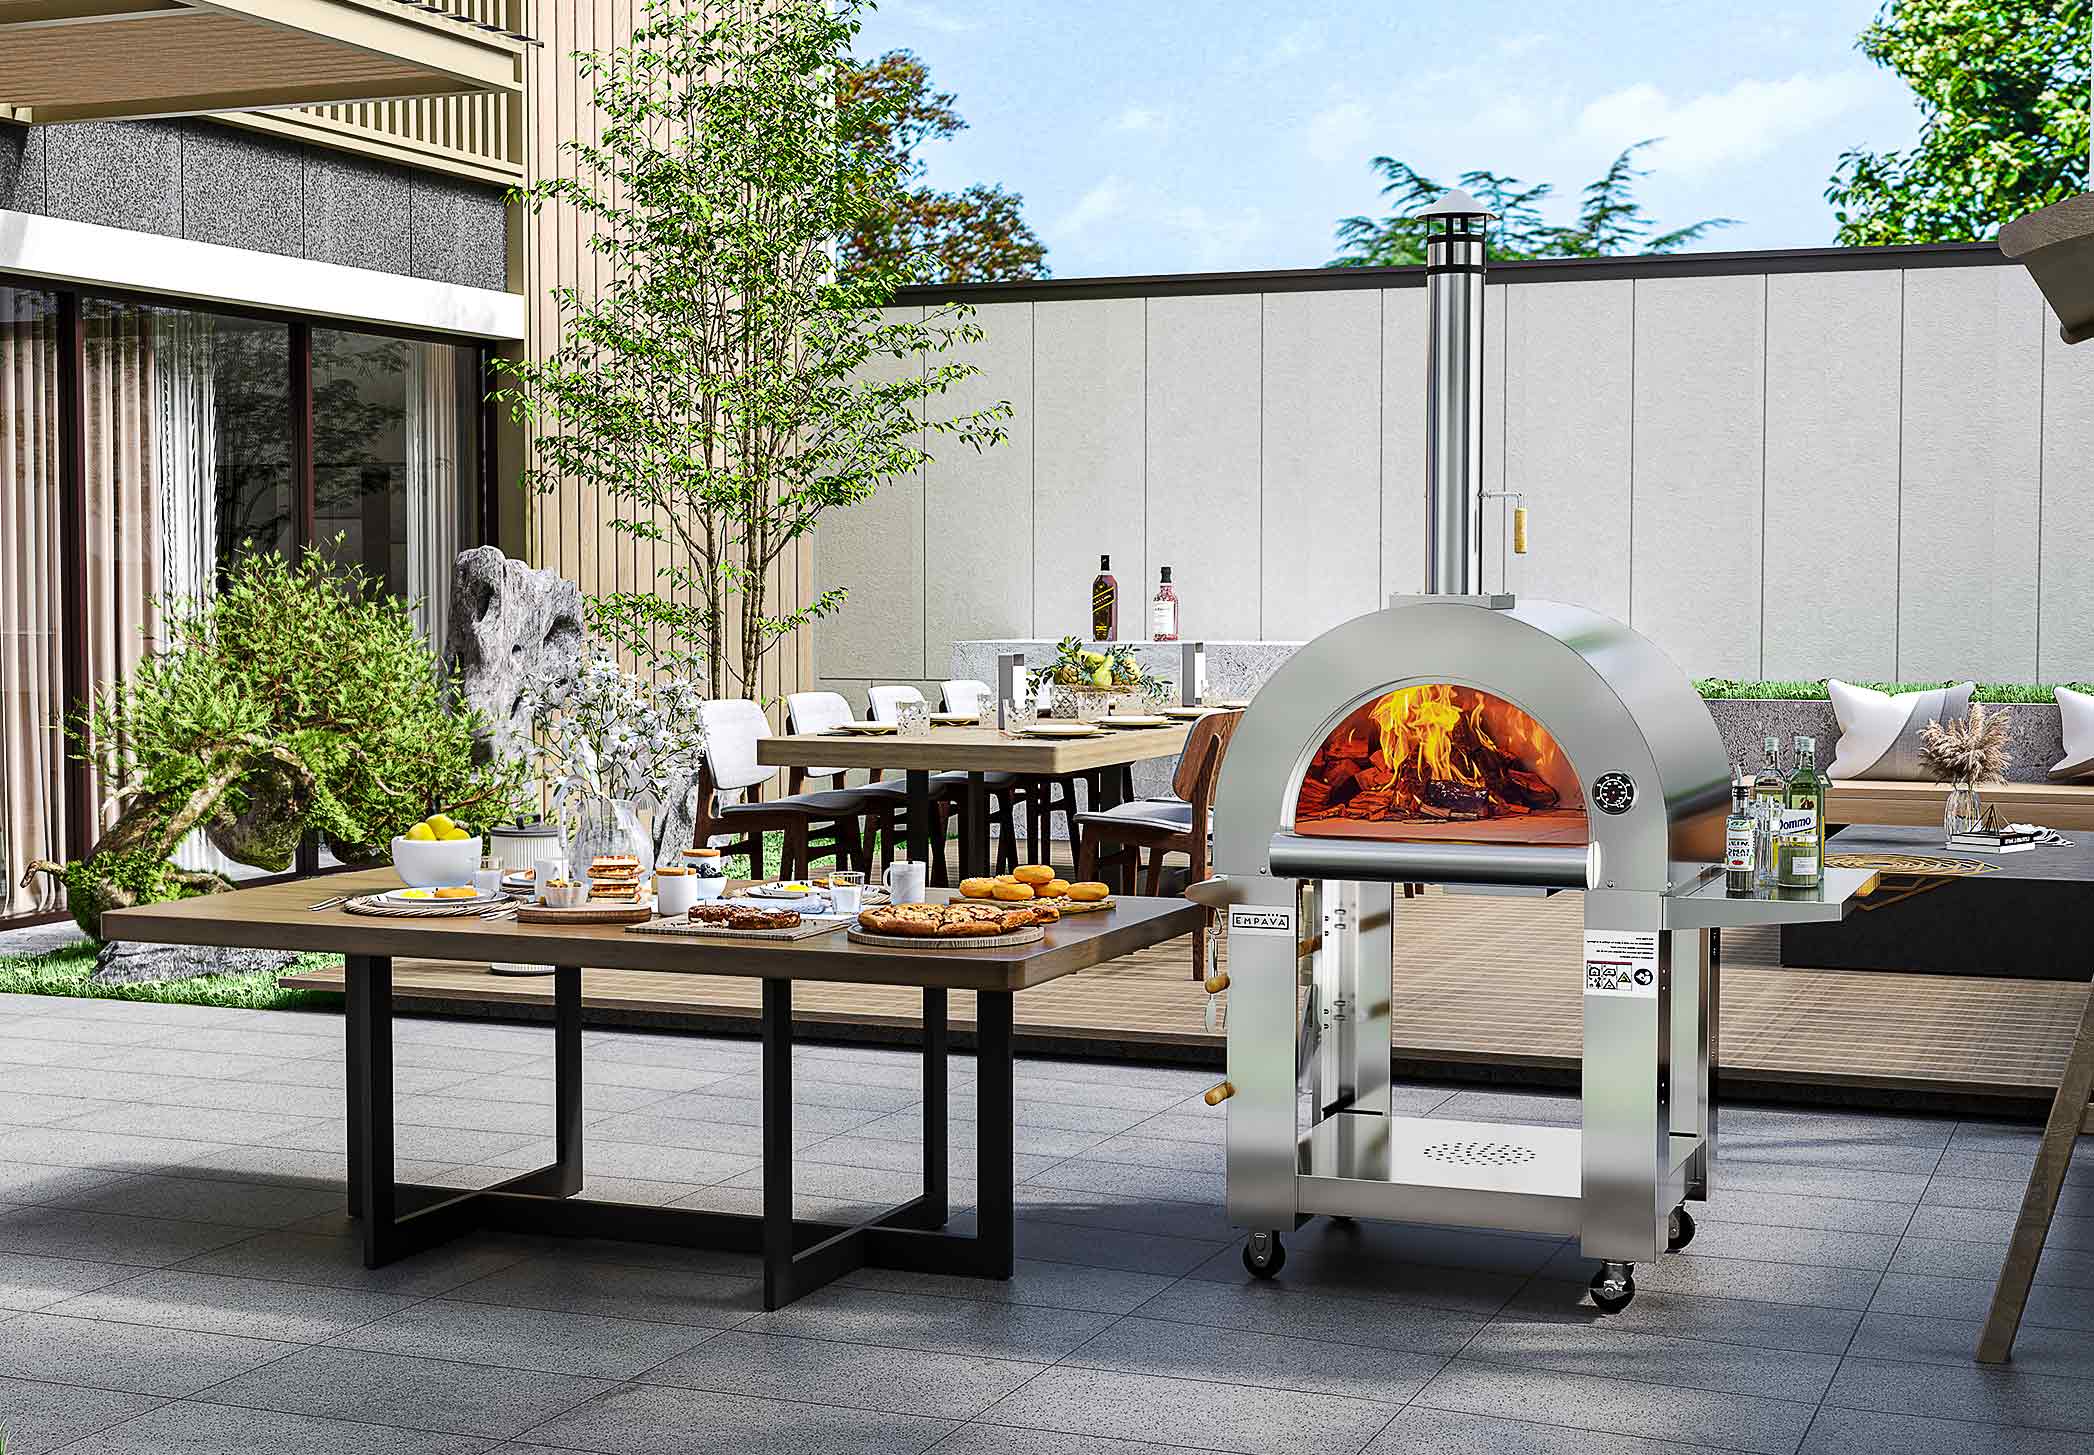 Empava Propane Tank Burning Outdoor Pizza Oven with Accessories in Stainless Steel EMPV-PG03